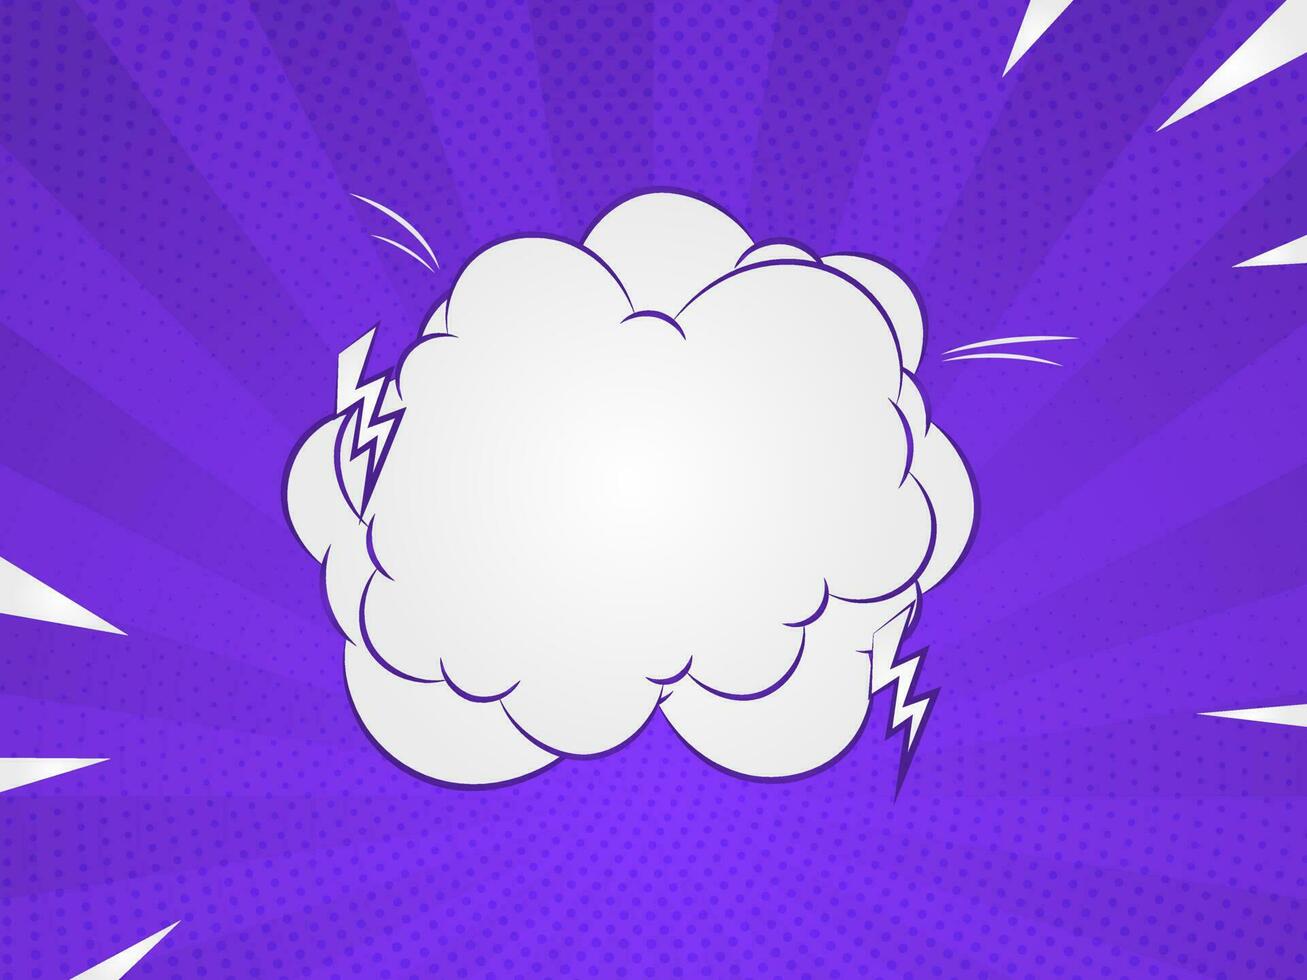 Comic Cloud Frame With Lightning Bolts On Purple Rays Dotted Background And Space For Text Message. vector